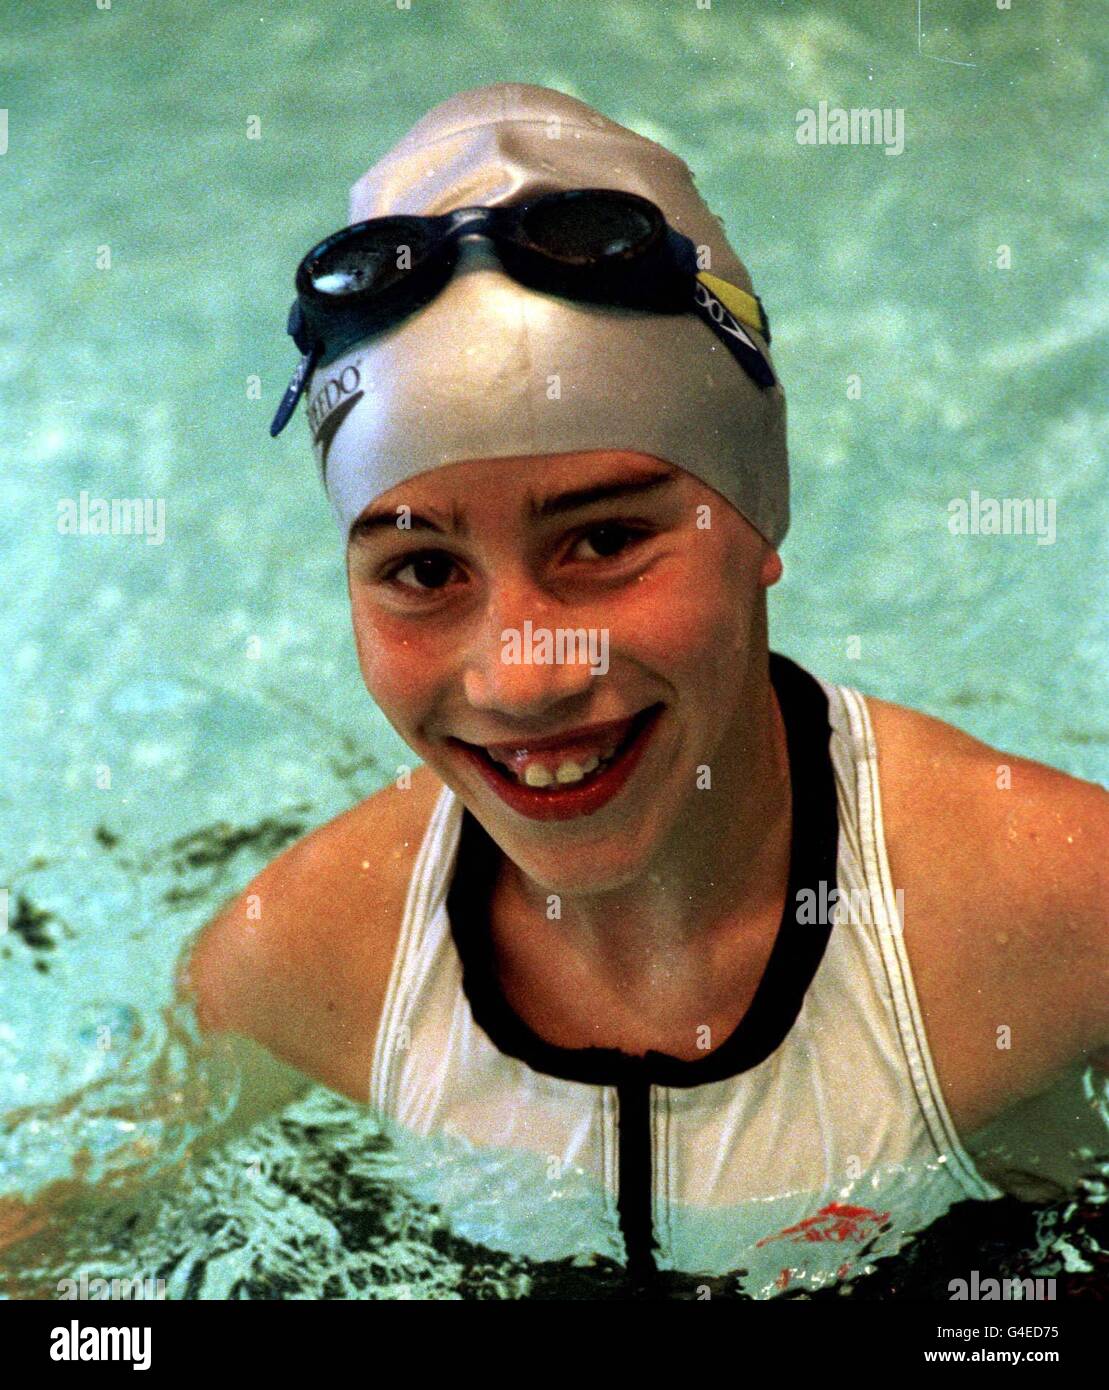 Lauren Leach from Burnley, Lancs and a member of the Birmingham Childrens Team double gold medal winner of the 25m Freestyle and Breaststoke at the Guardian Health British Transplant Games, Belfast today (Saturday). PA Photos. Stock Photo